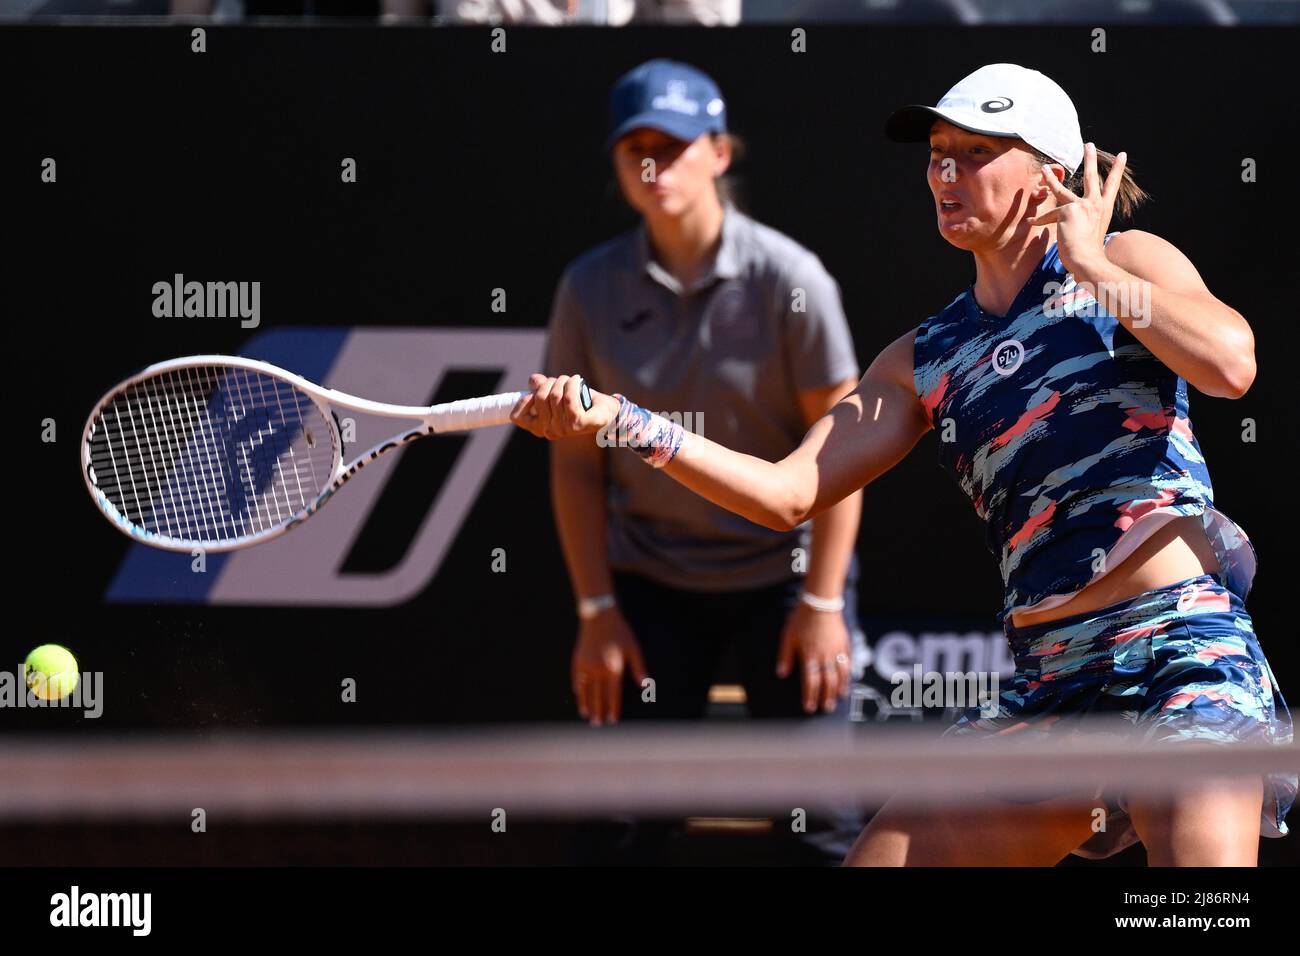 May 13, 2022, Rome, Italy: Iga Swiatek (POL) during the quarter finals  against Bianca Andreescu (CAN) of the WTA Master 1000 Internazionali BNL D' Italia tournament at Foro Italico on May 13, 2022. (